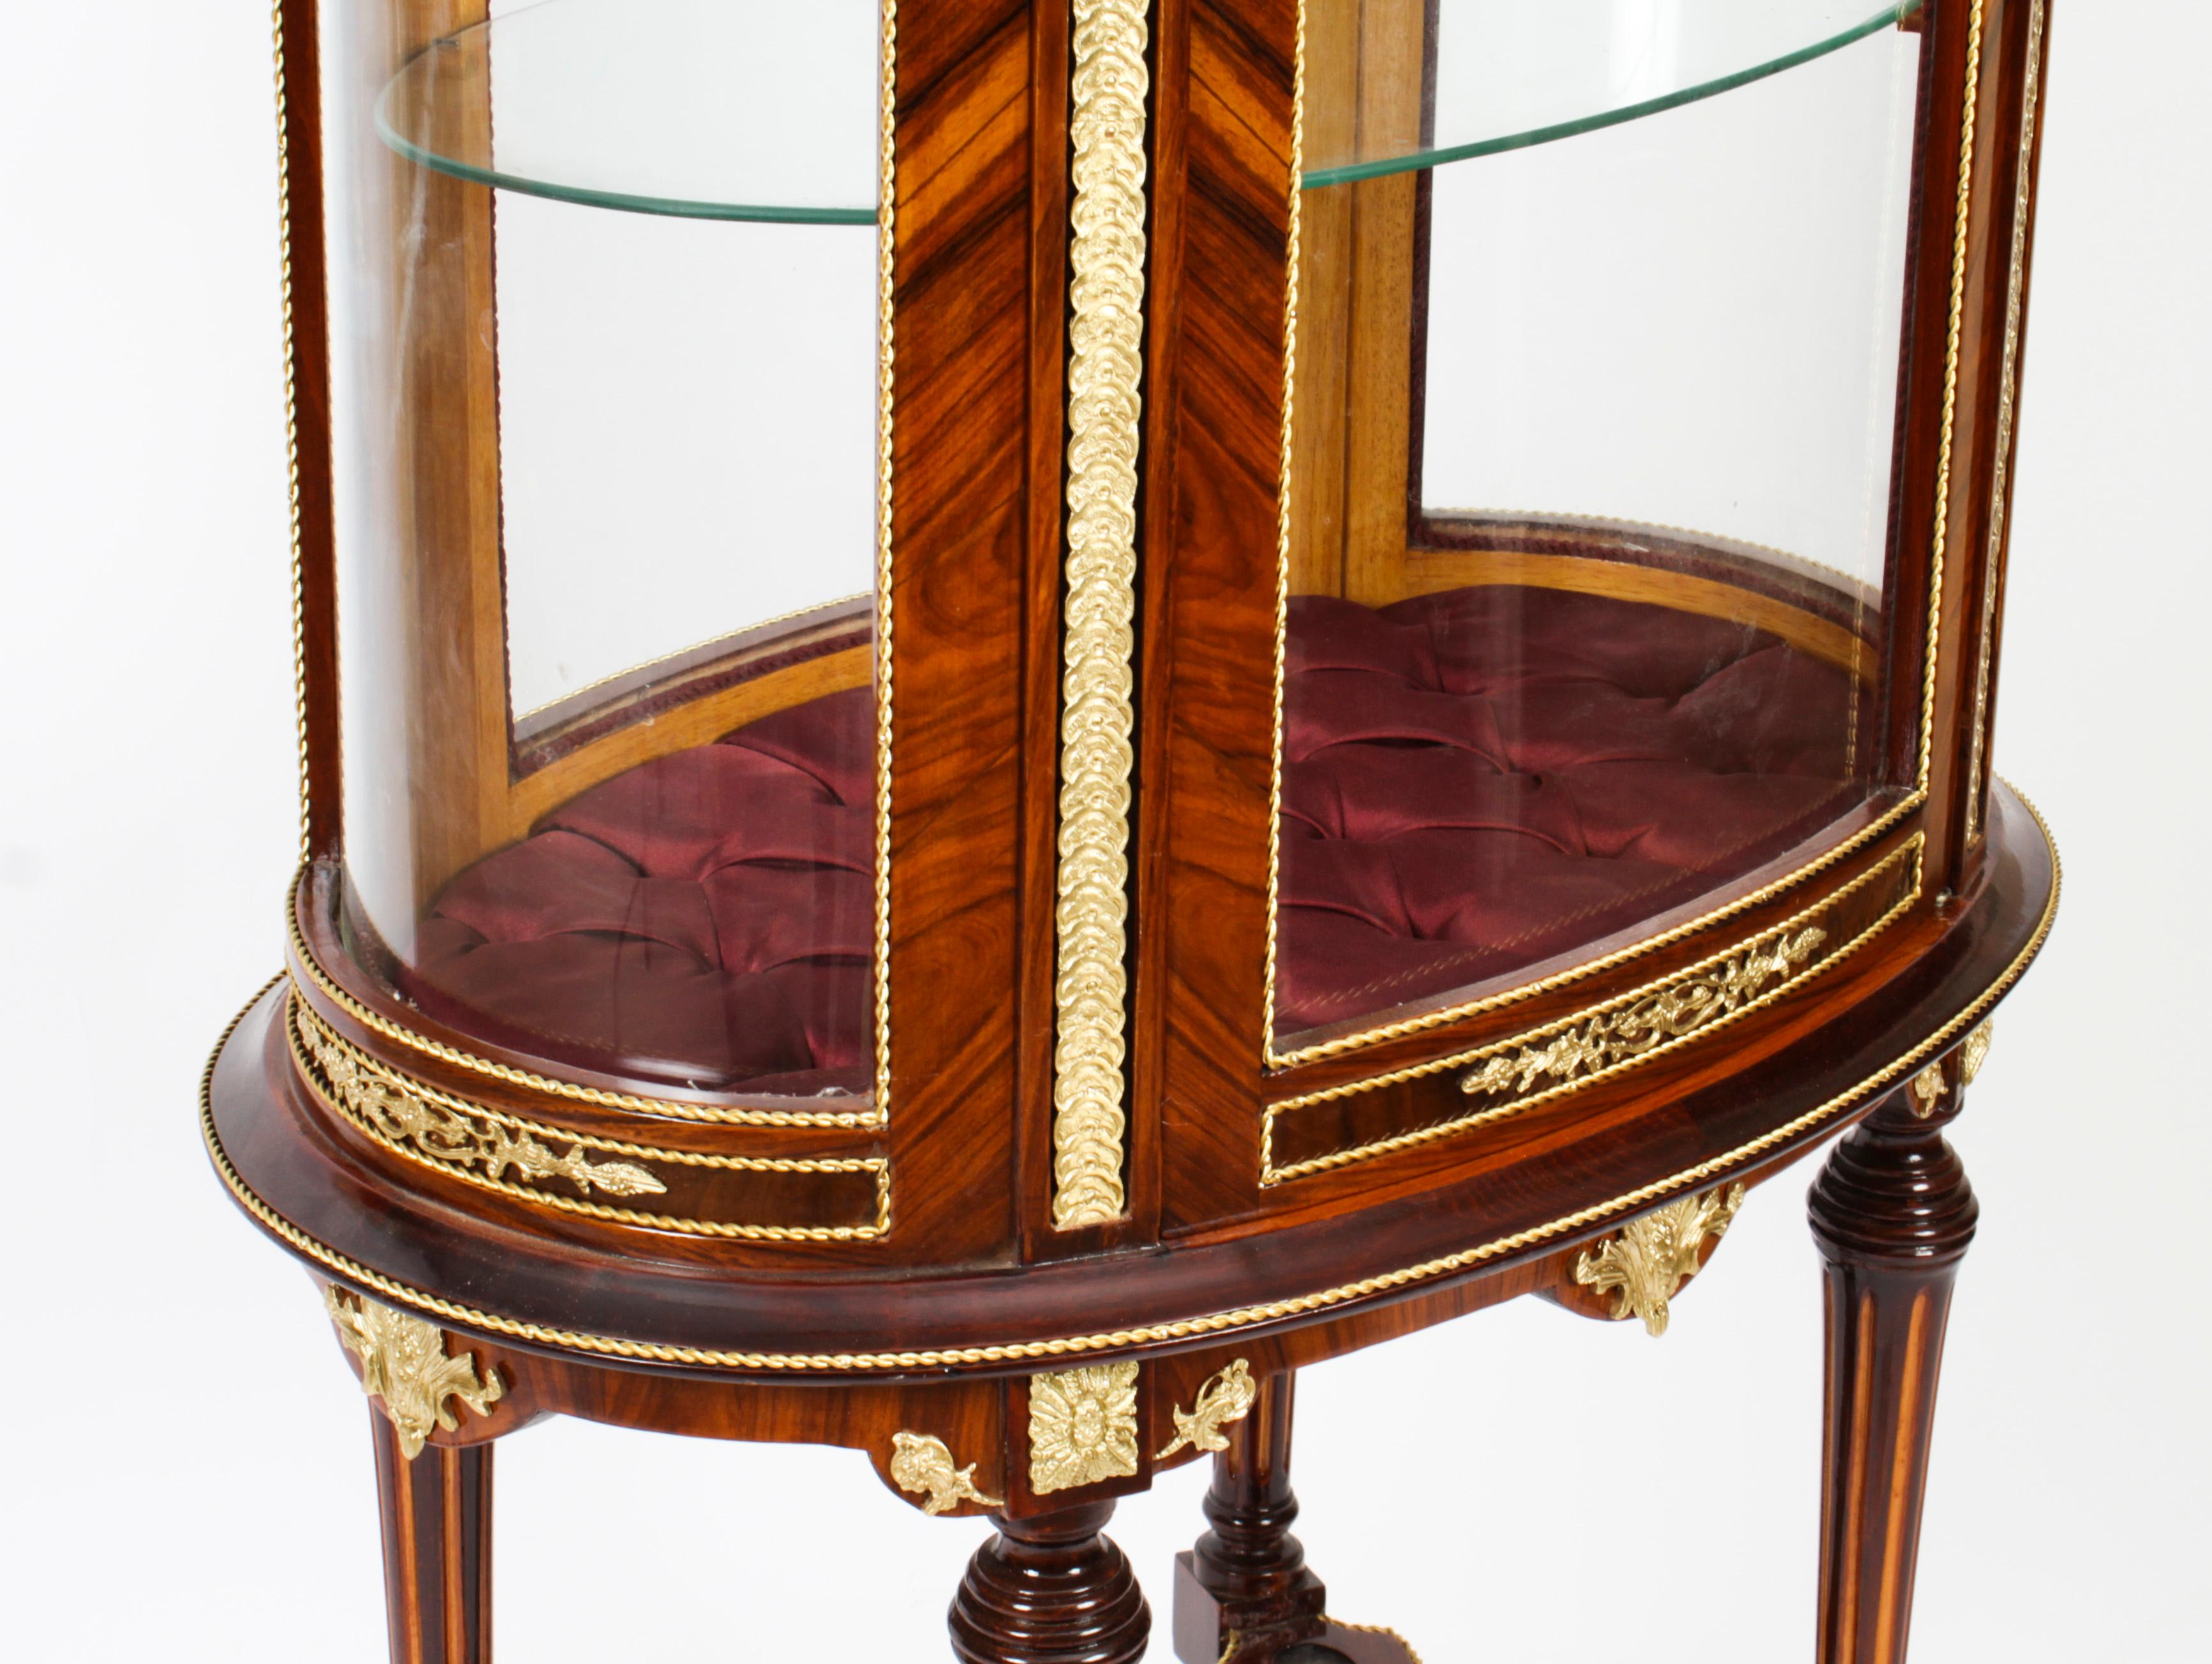 Vintage Oval Walnut & Ormolu Mounted Marble Topped Display Cabinet 20th Century For Sale 3